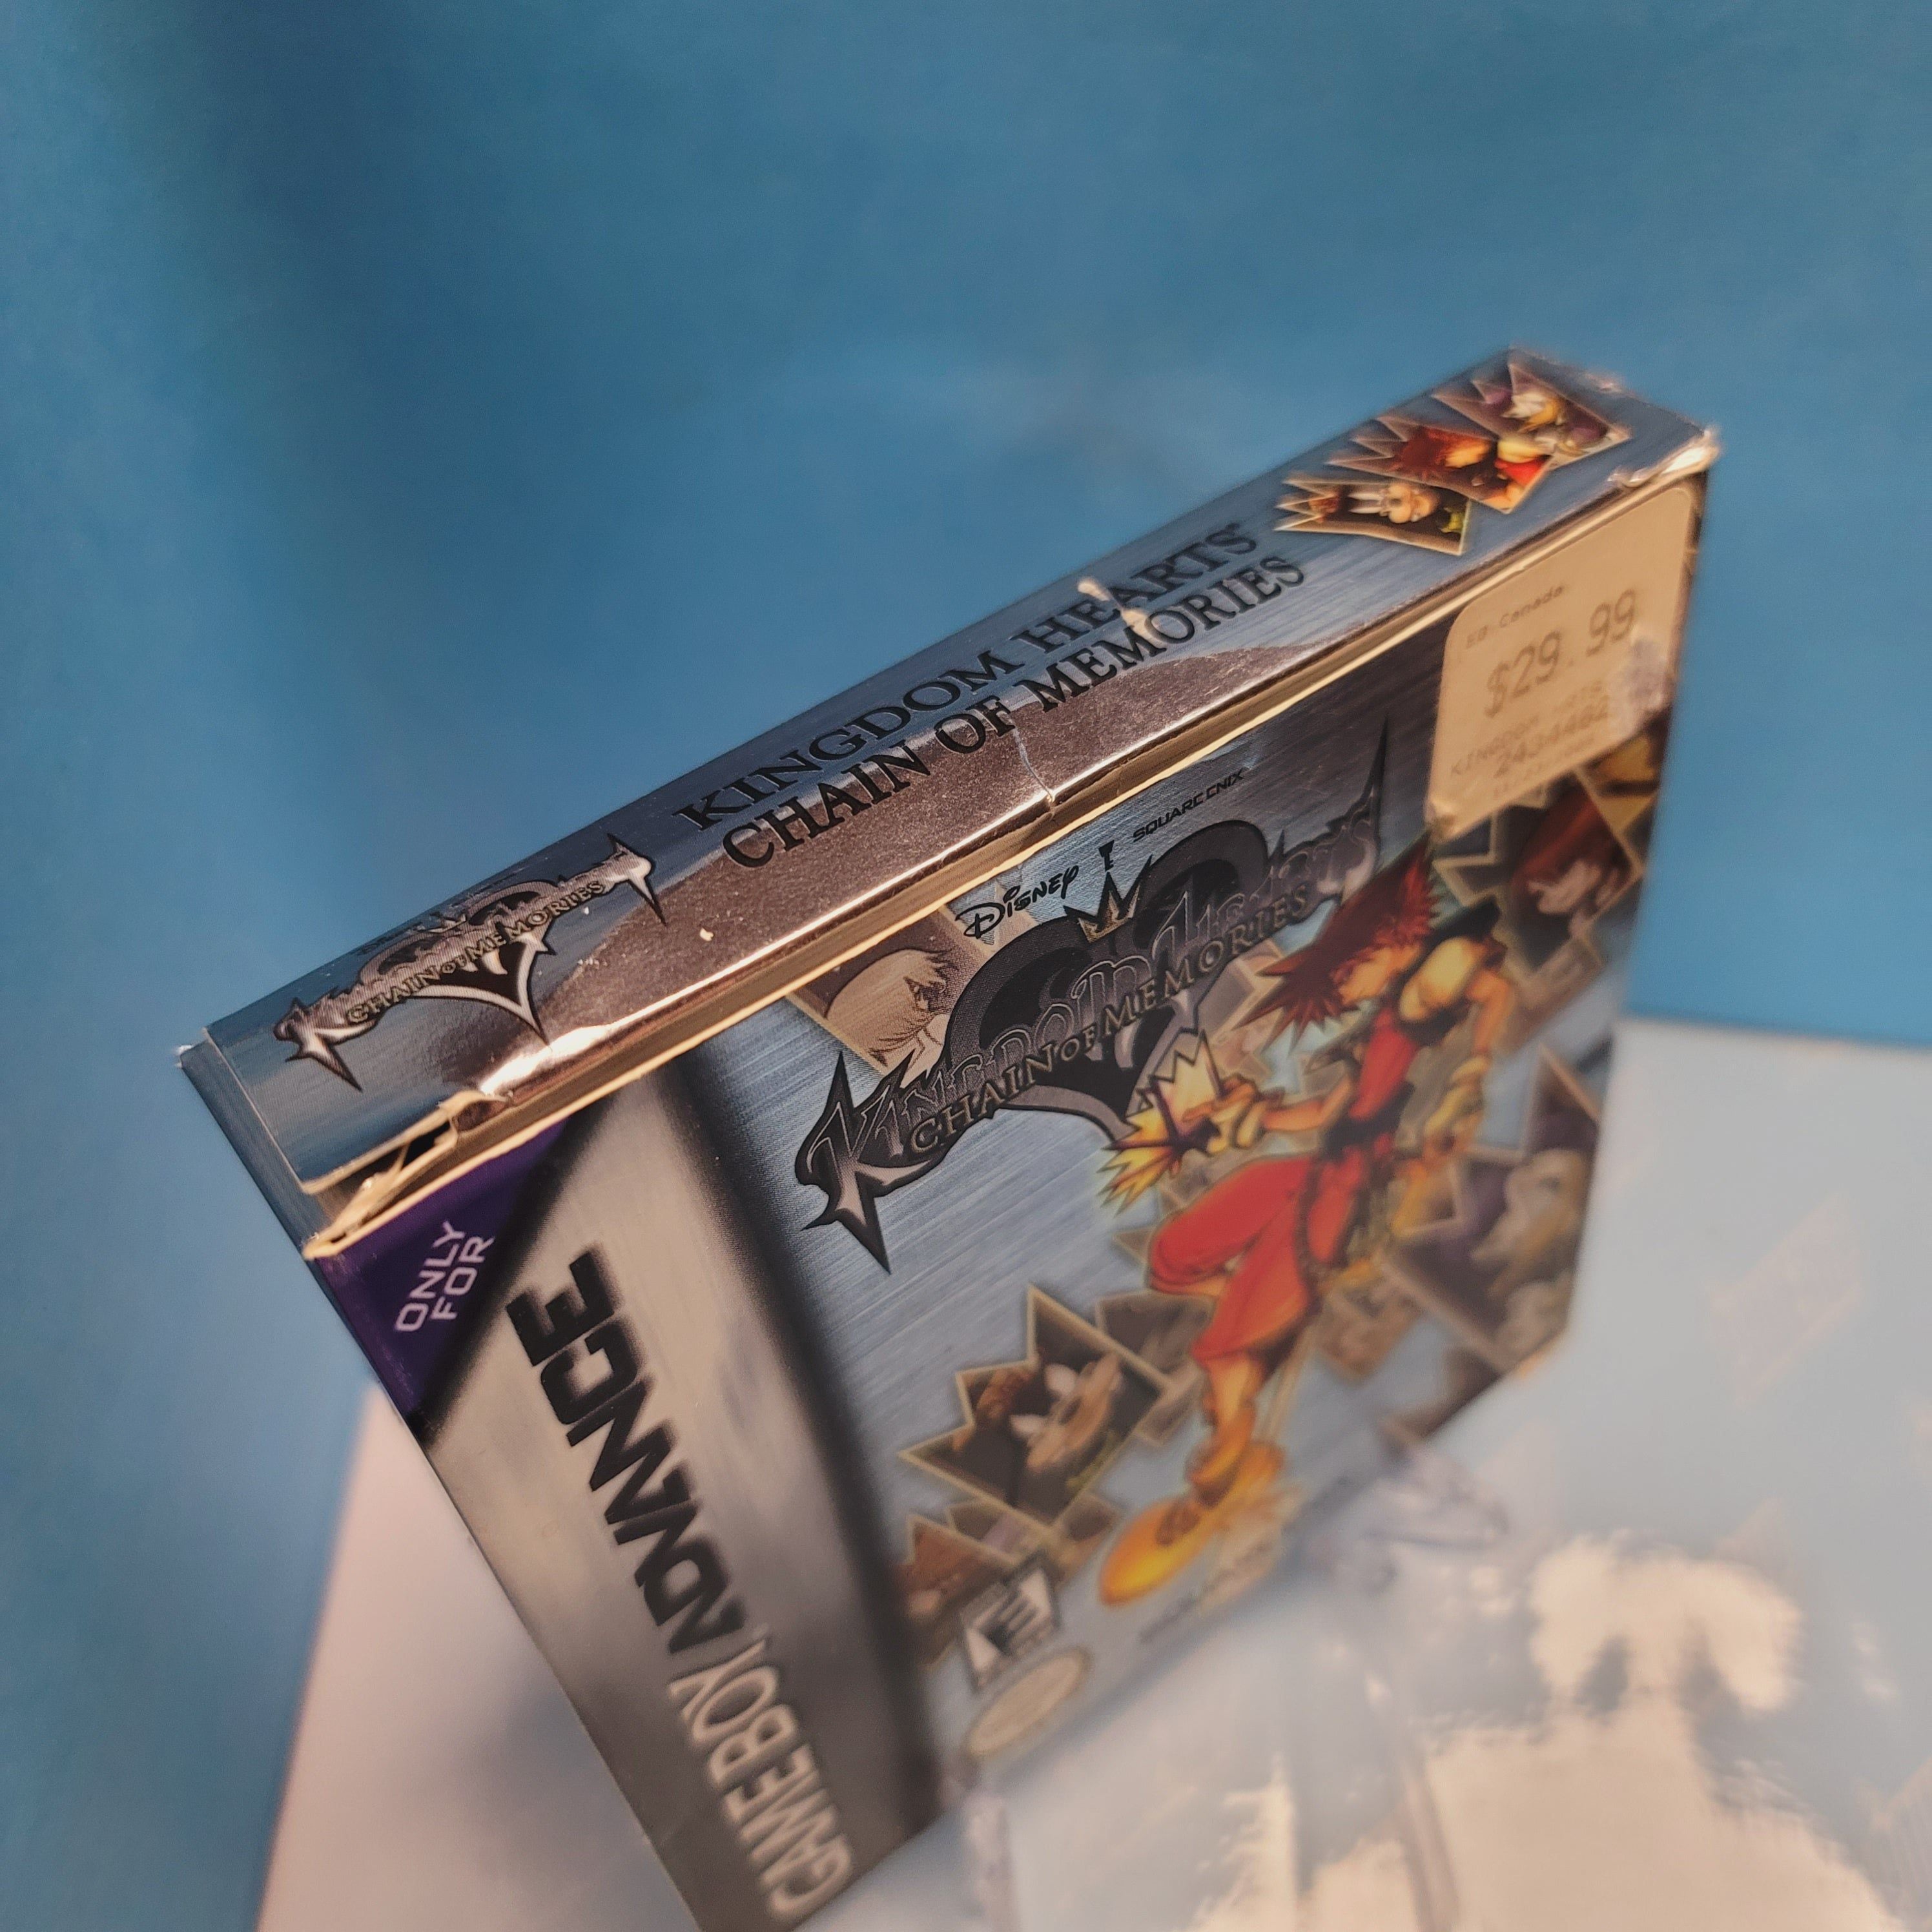 GBA - Kingdom Hearts Chain of Memories (Complete in Box / B- / With Manual)